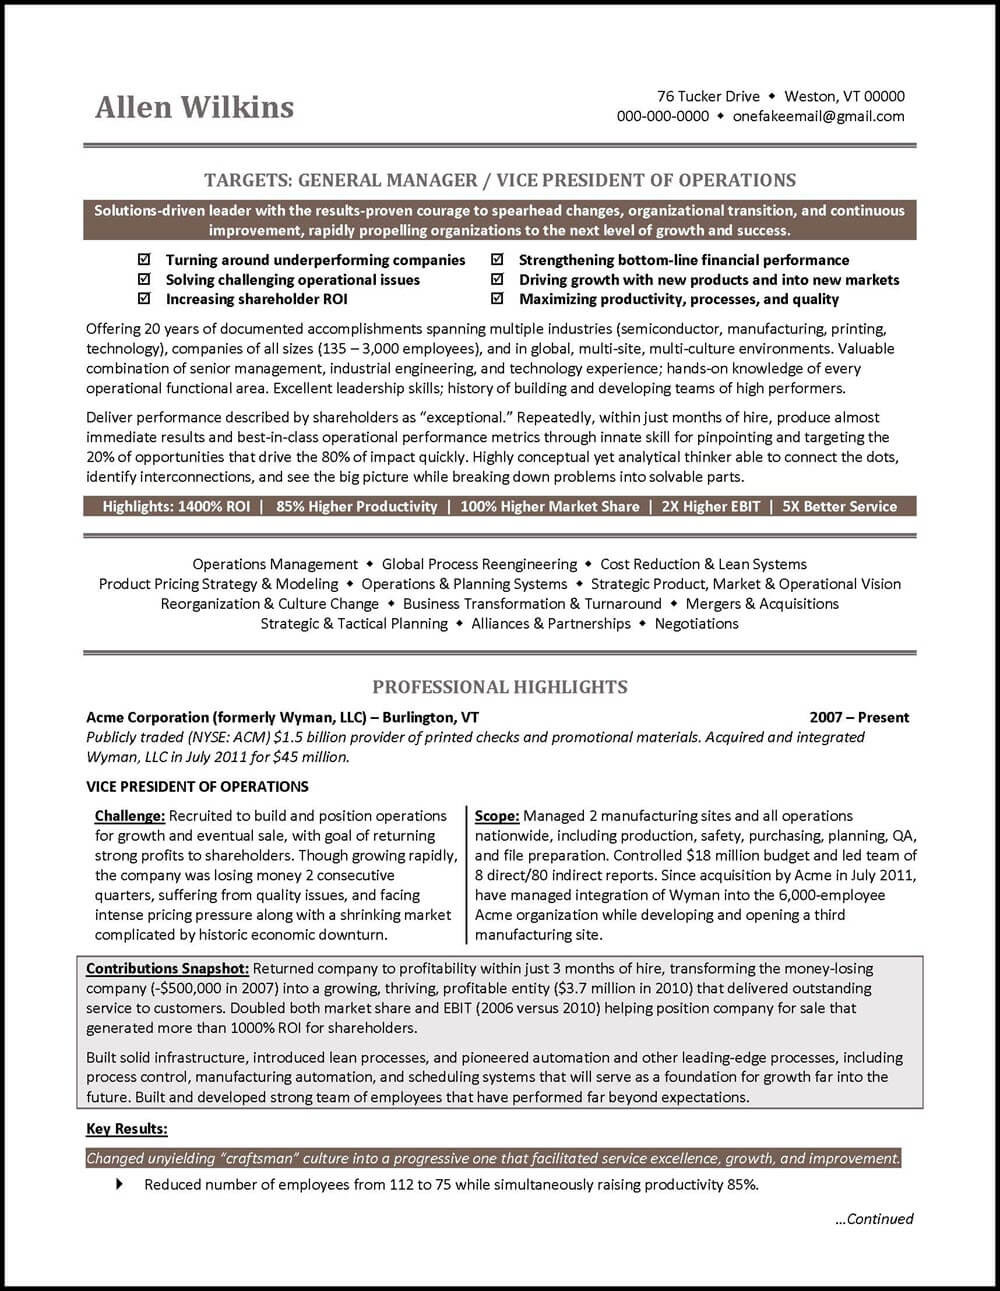 Resume Samples for area Vice President Vice President Resume Example – Distinctive Career Services